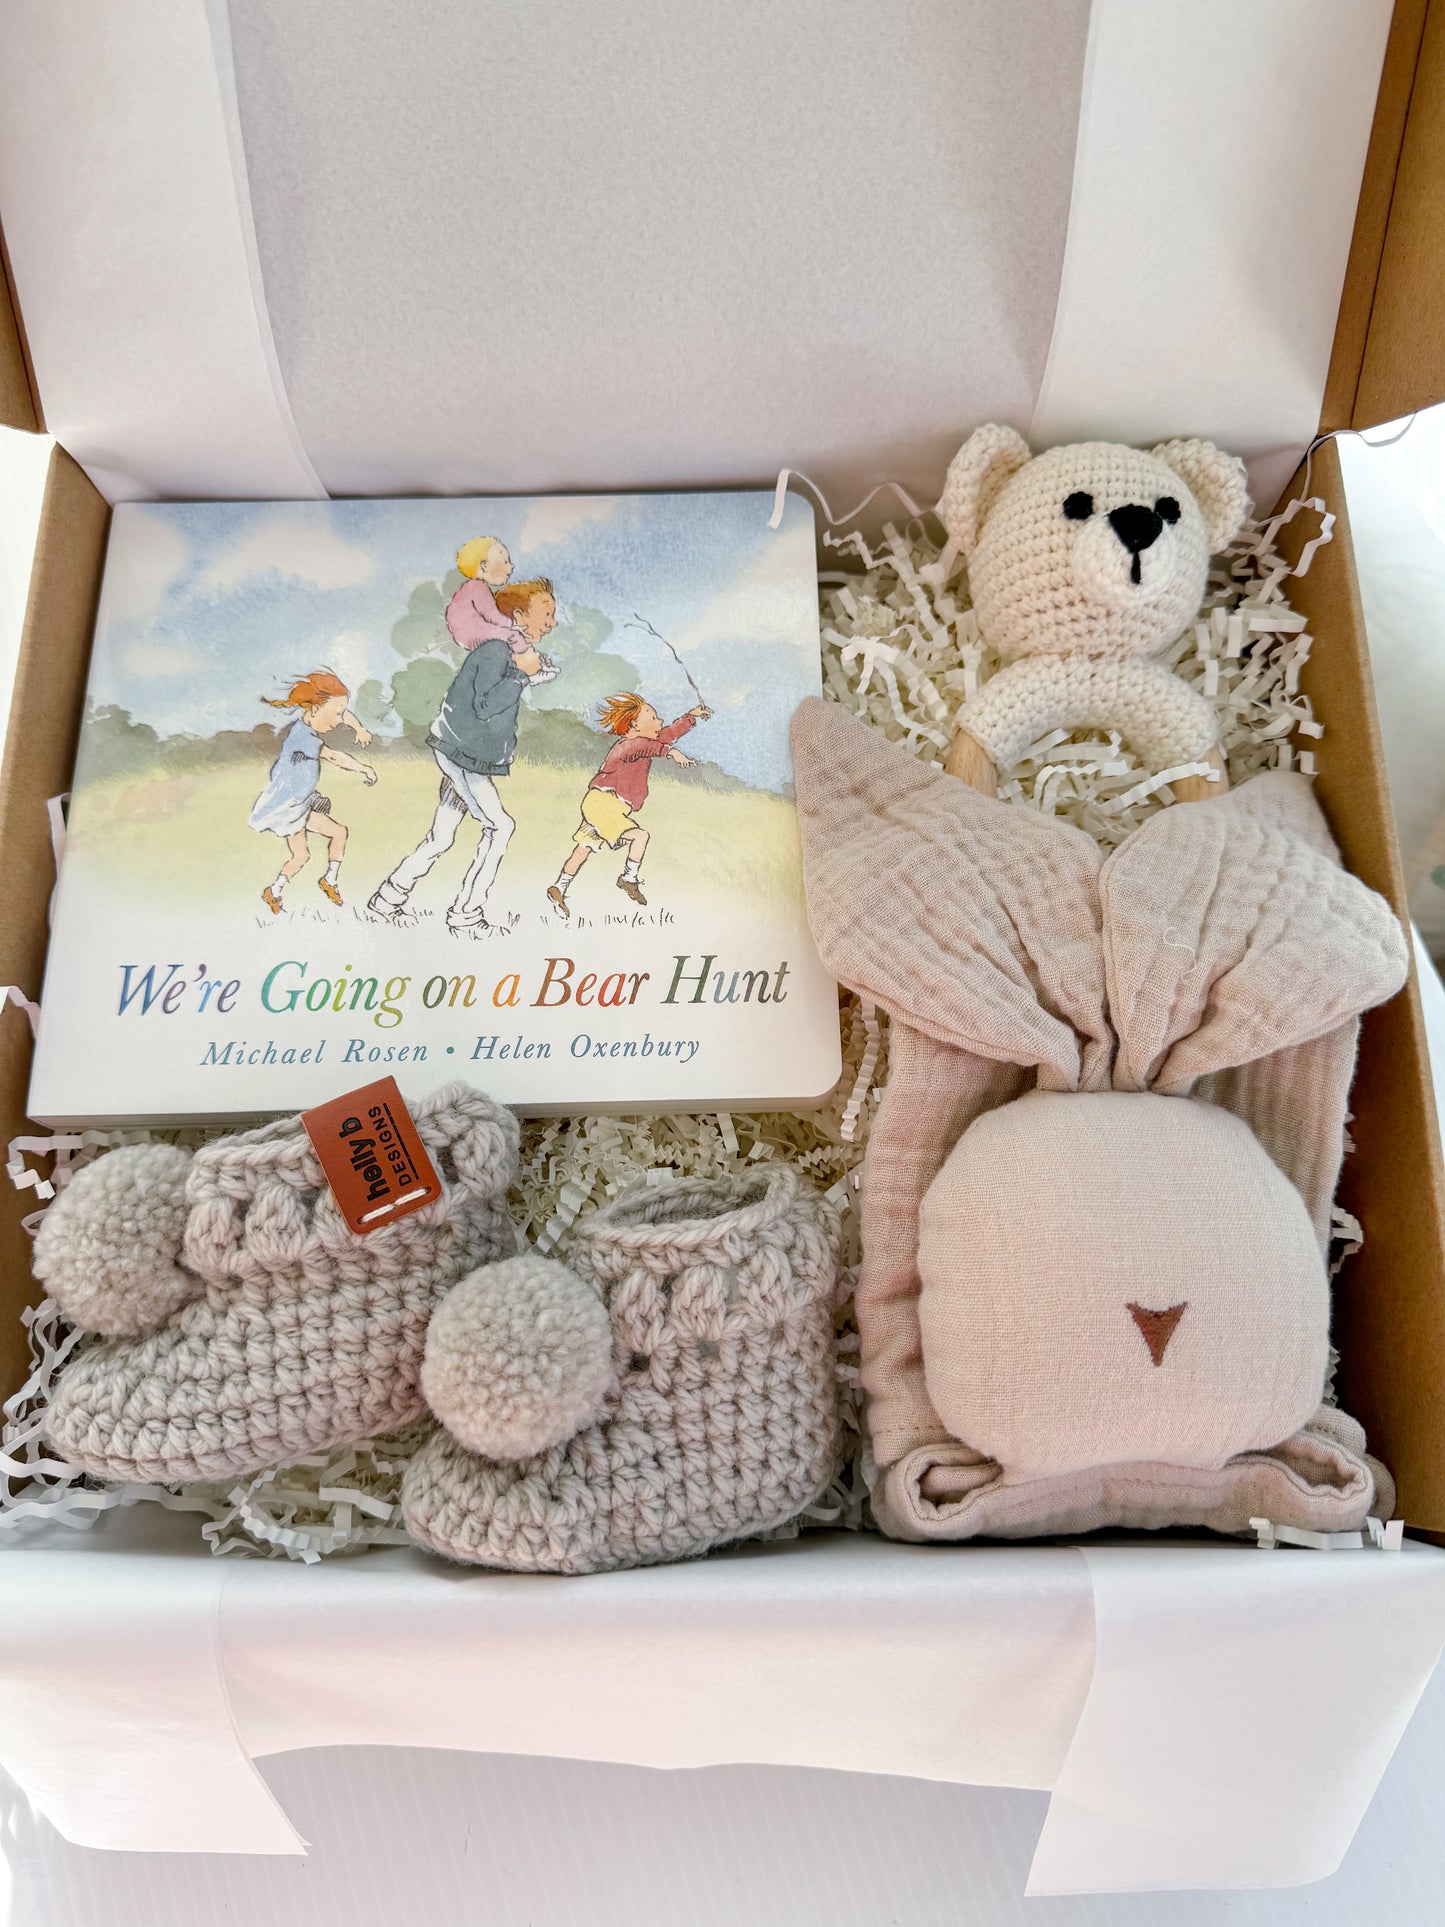 Corporate Baby/Maternity Leave Gift Hamper